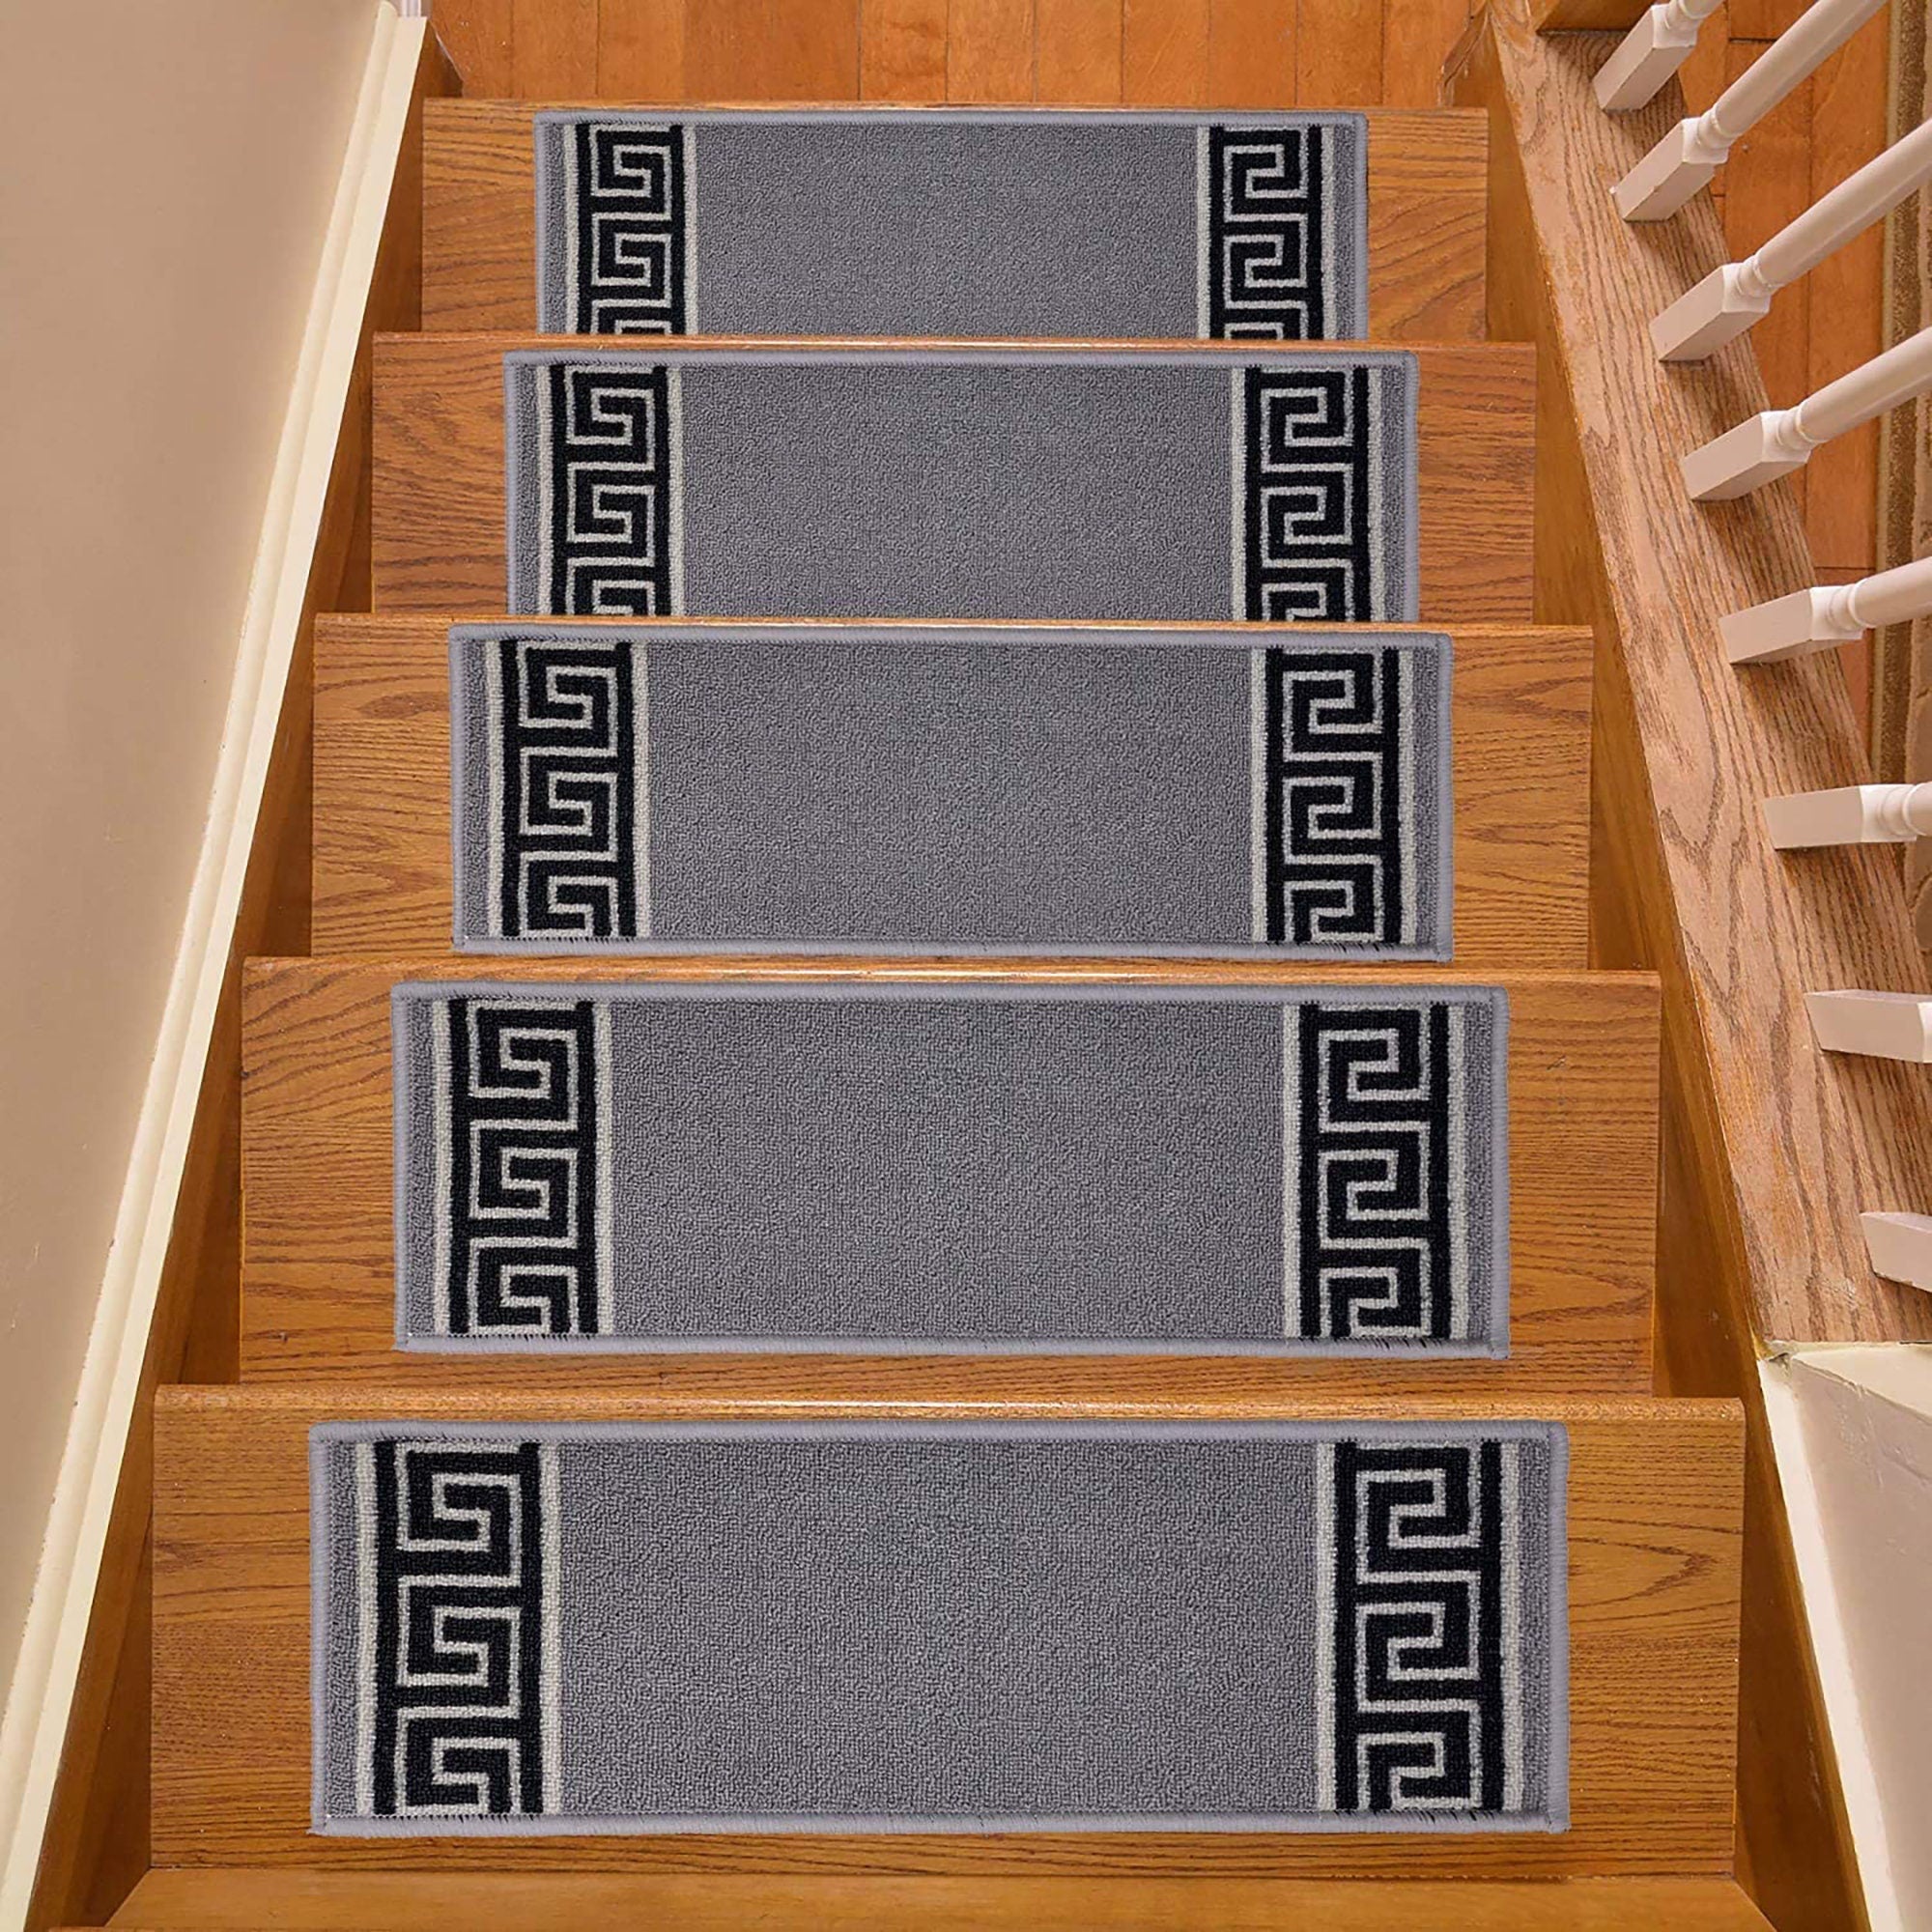 Machine Washable Stair Tread Greek Key Bordered Black and Gray Skid Resistant Latex Back Carpet Stair Treads Size 8.5" x 26" Many Set Option